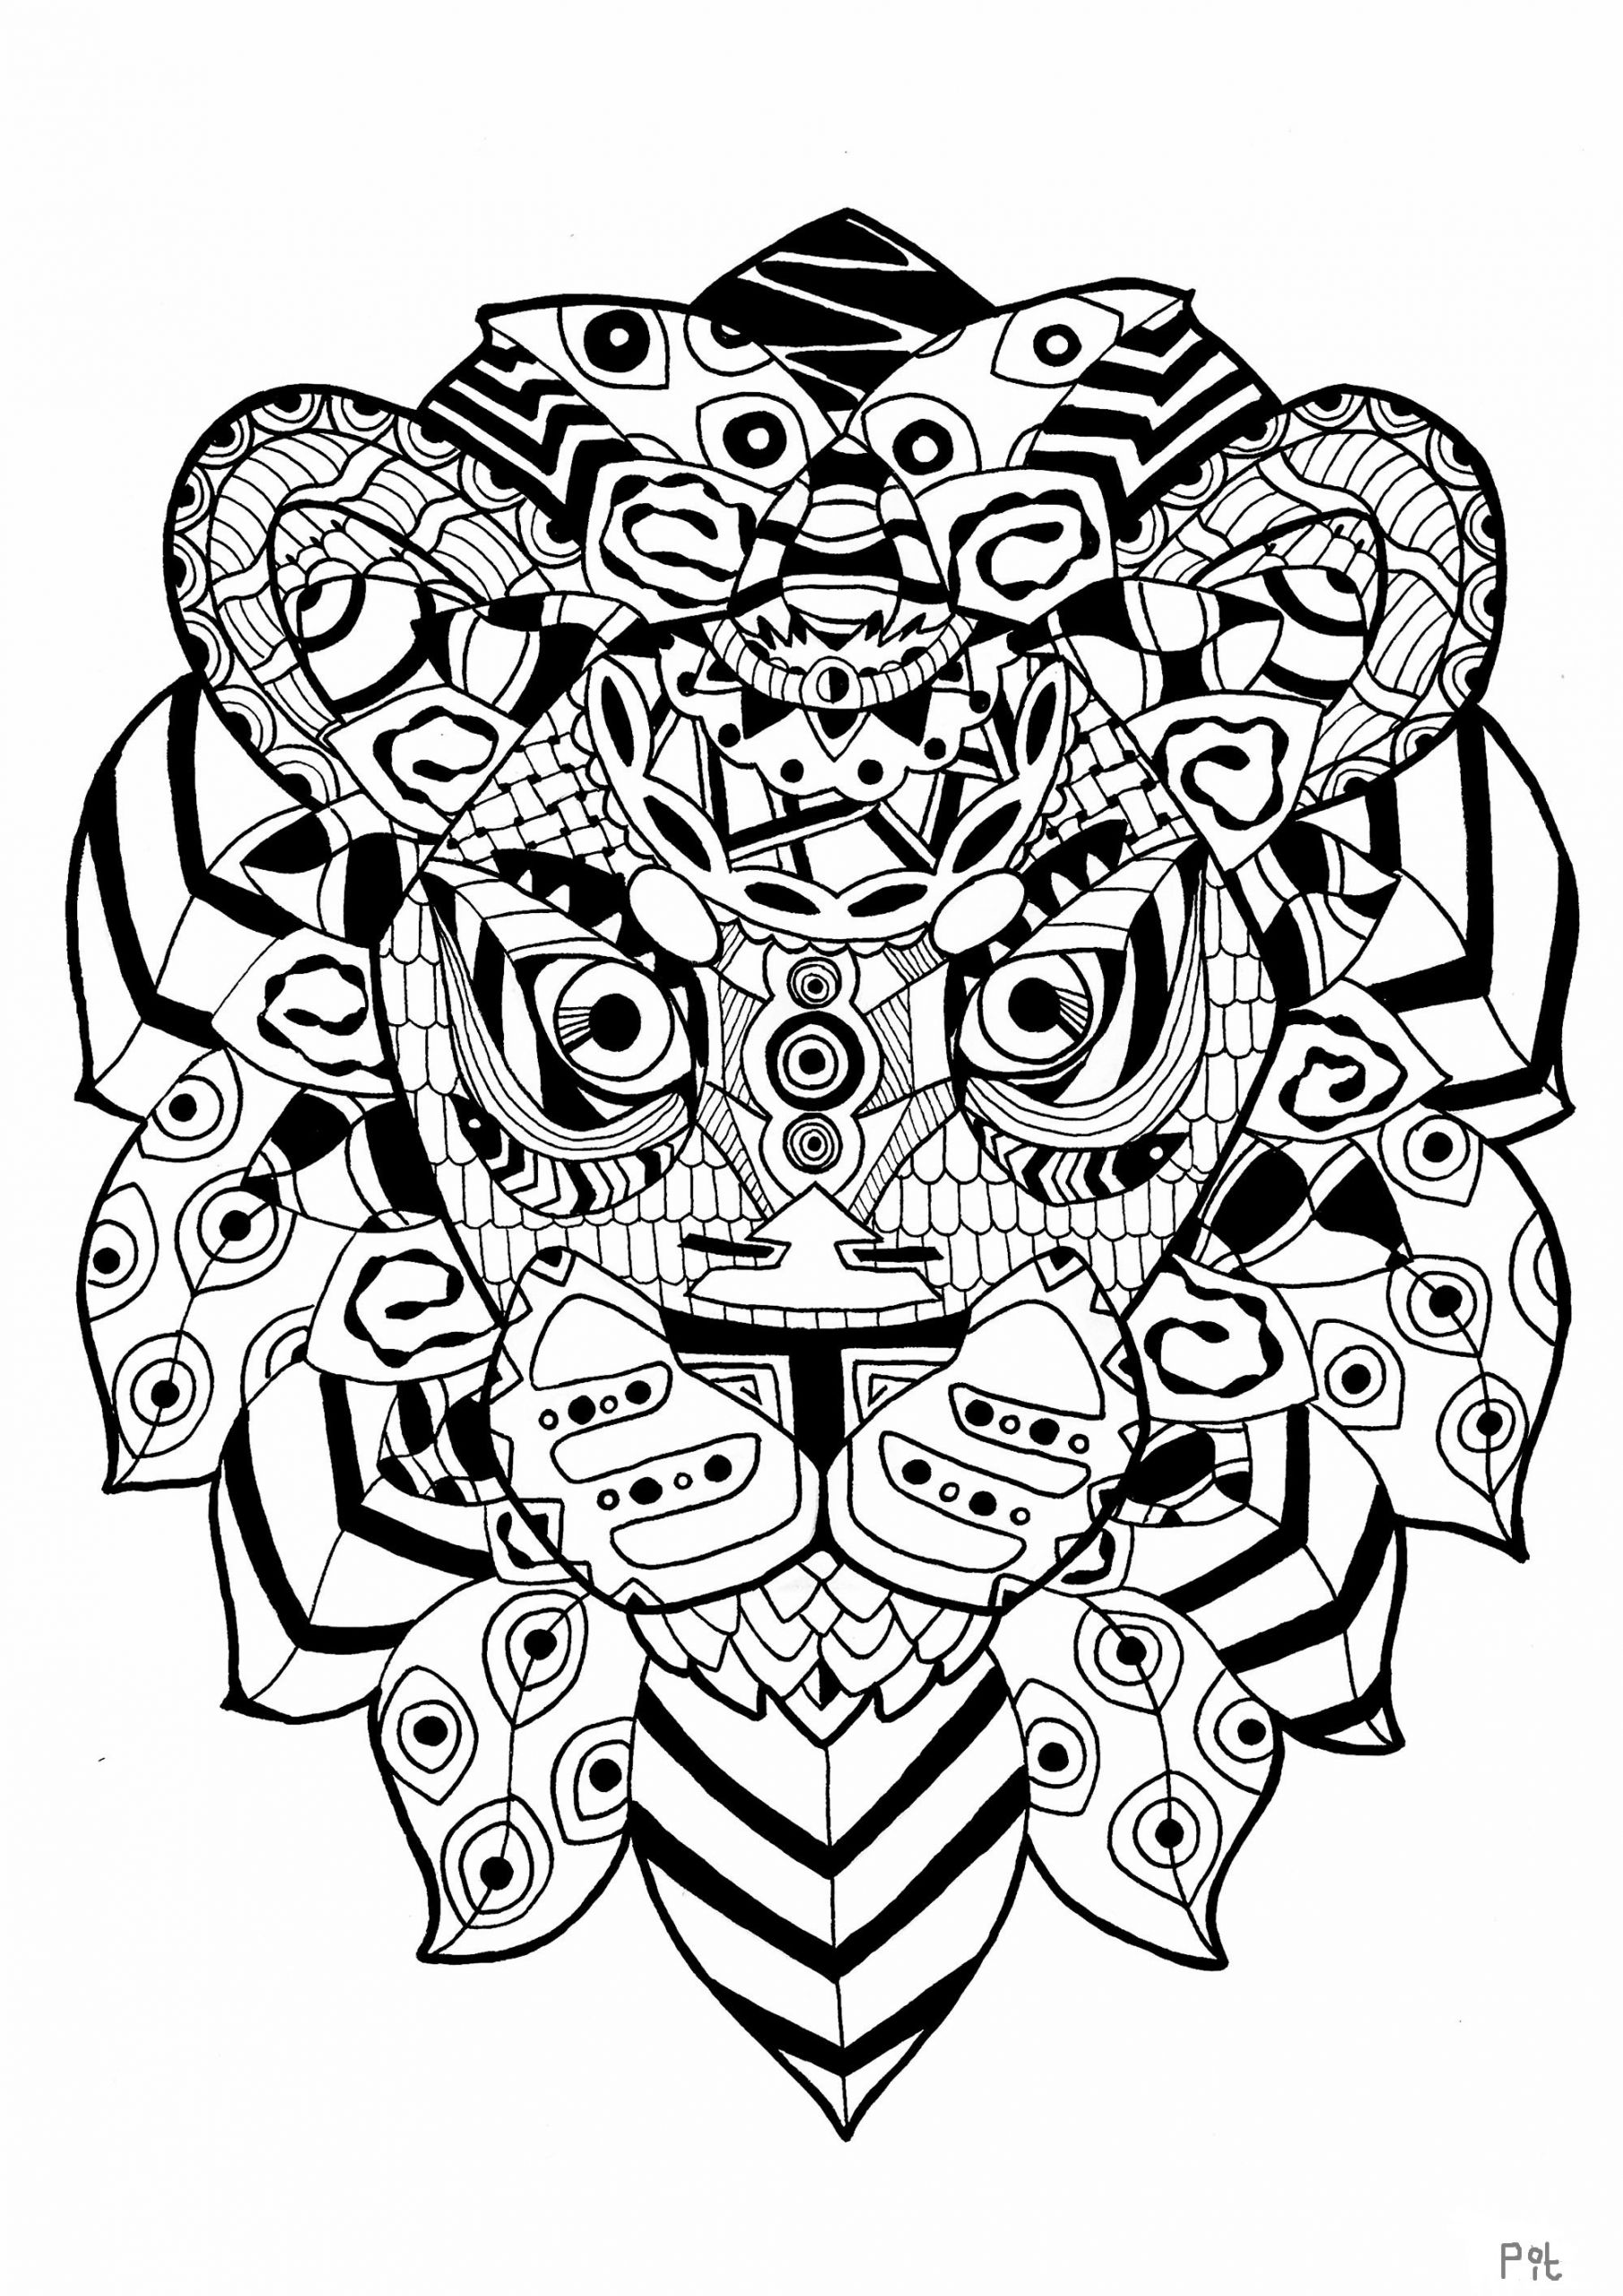 Lion Coloring Pages For Adults
 Zentangle lion Lions Adult Coloring Pages